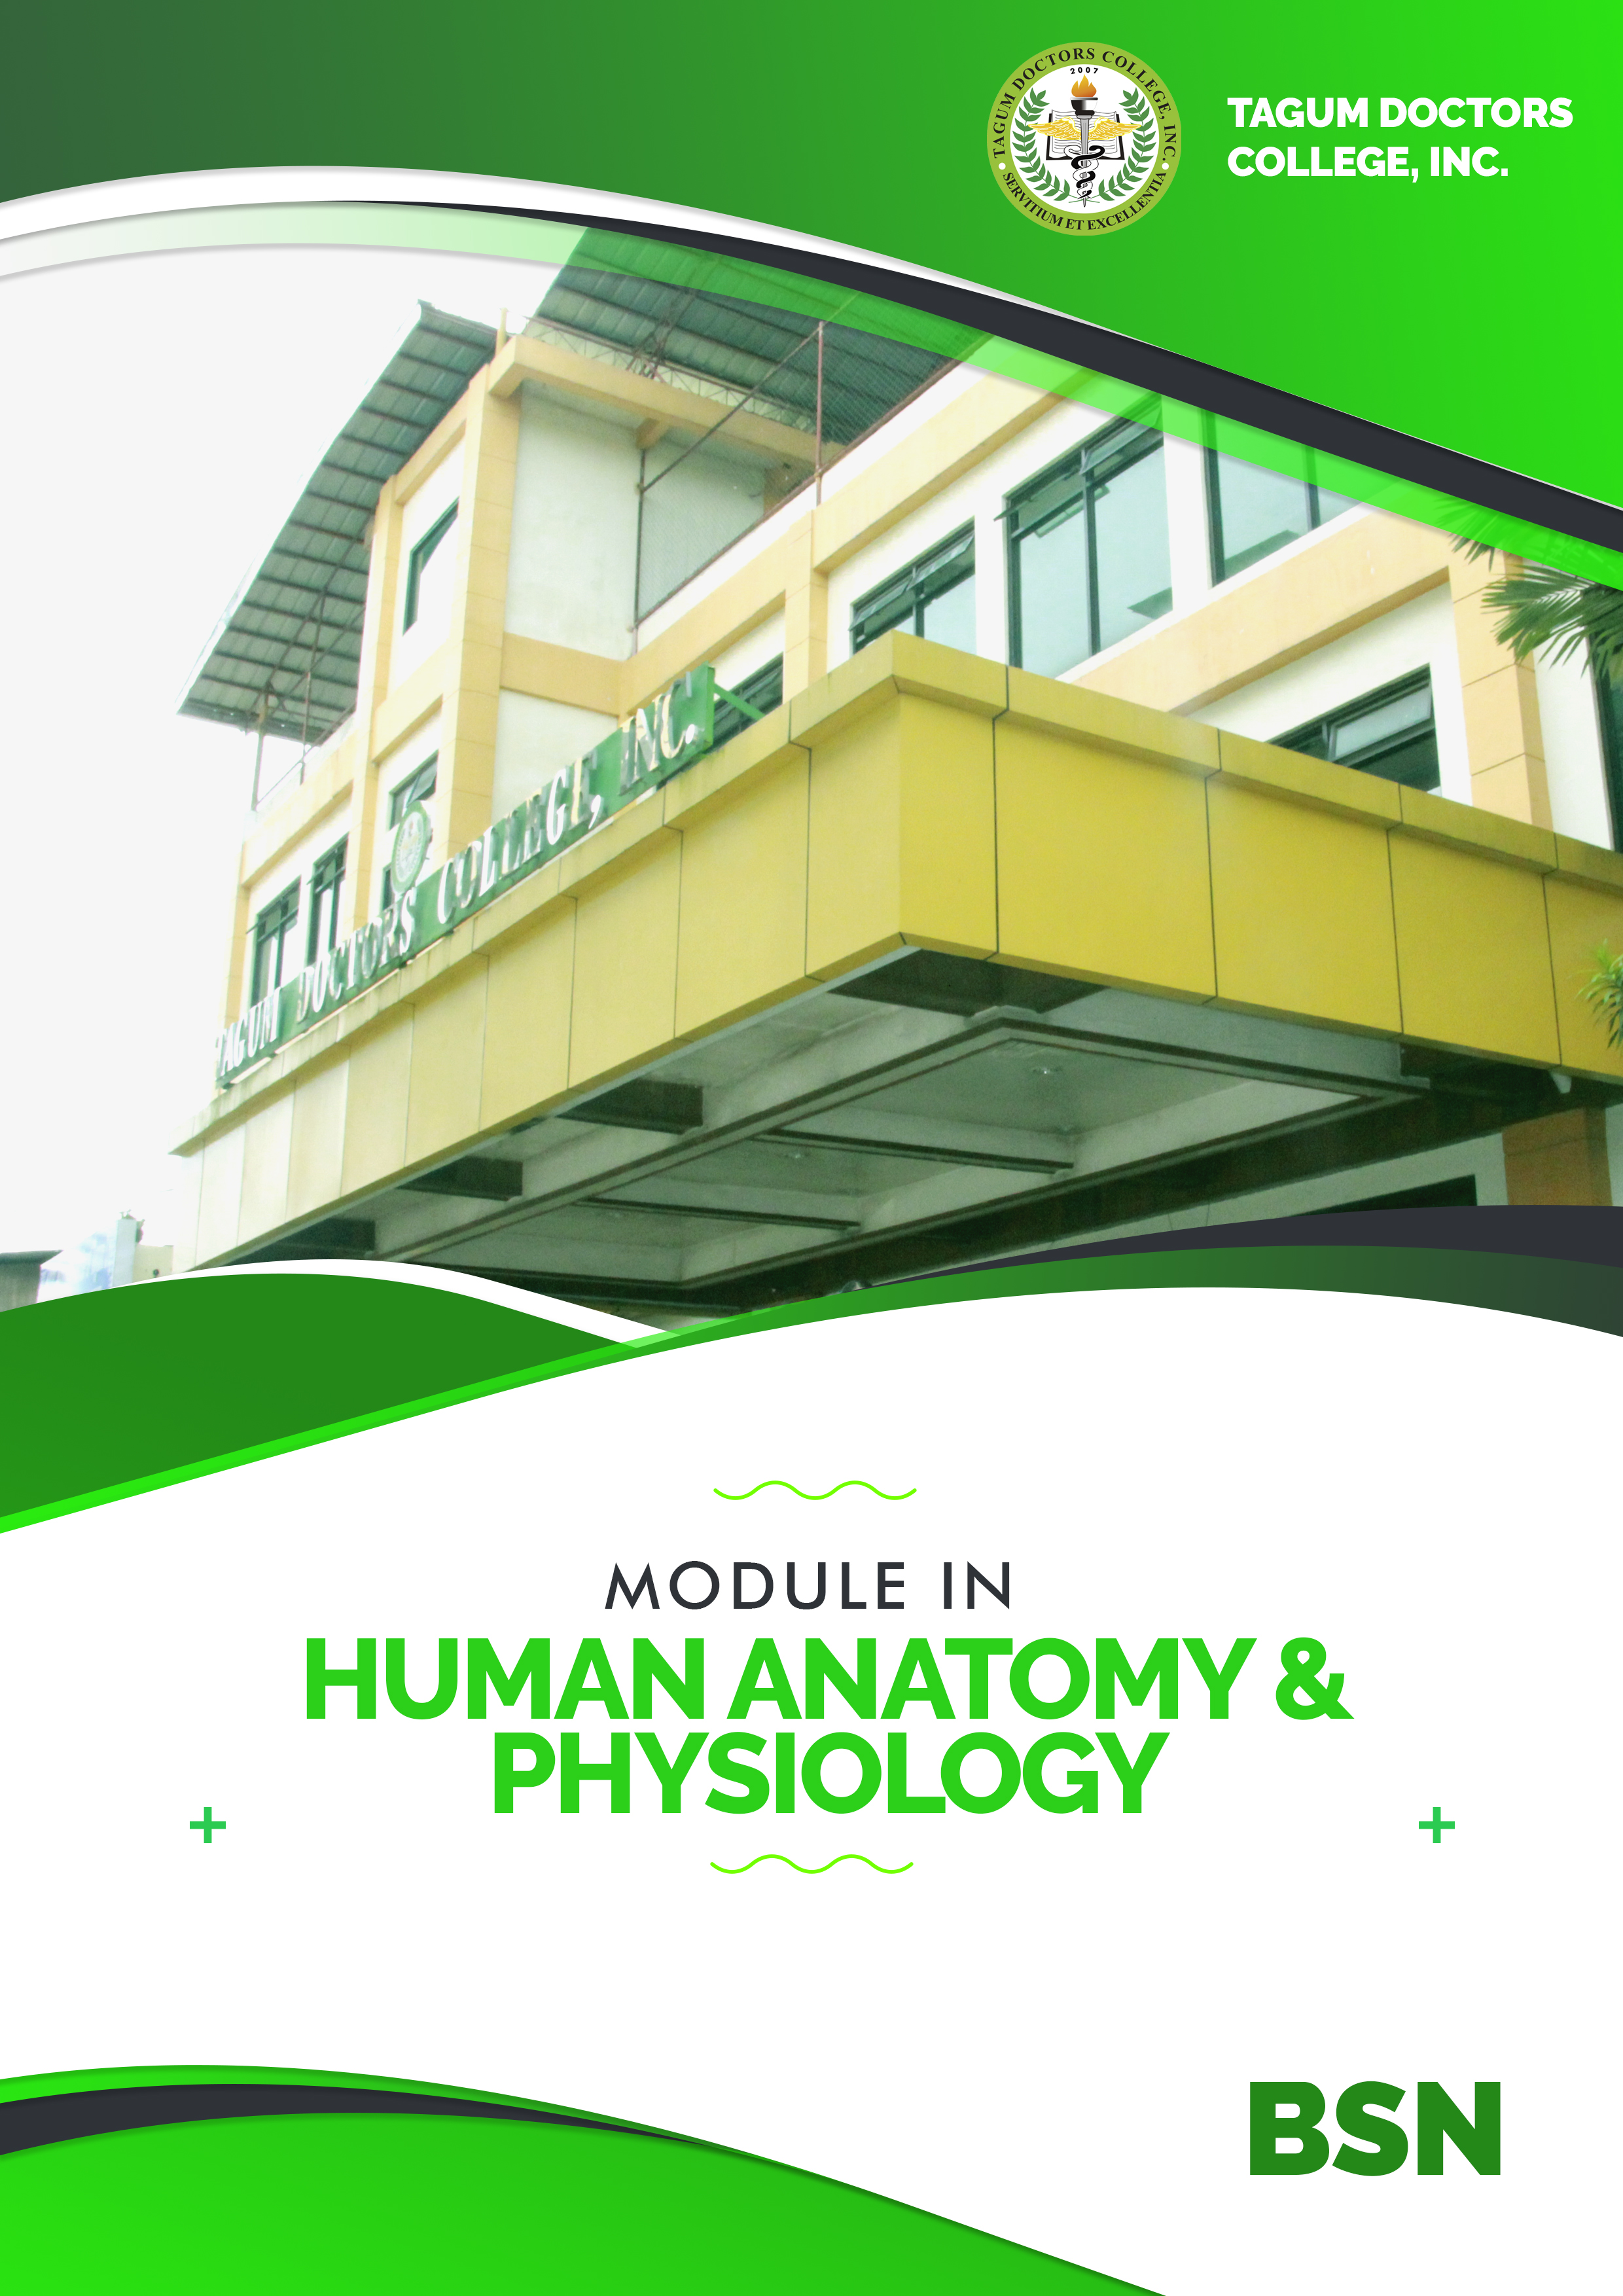 Human Anatomy and Physiology - BSN 1-D